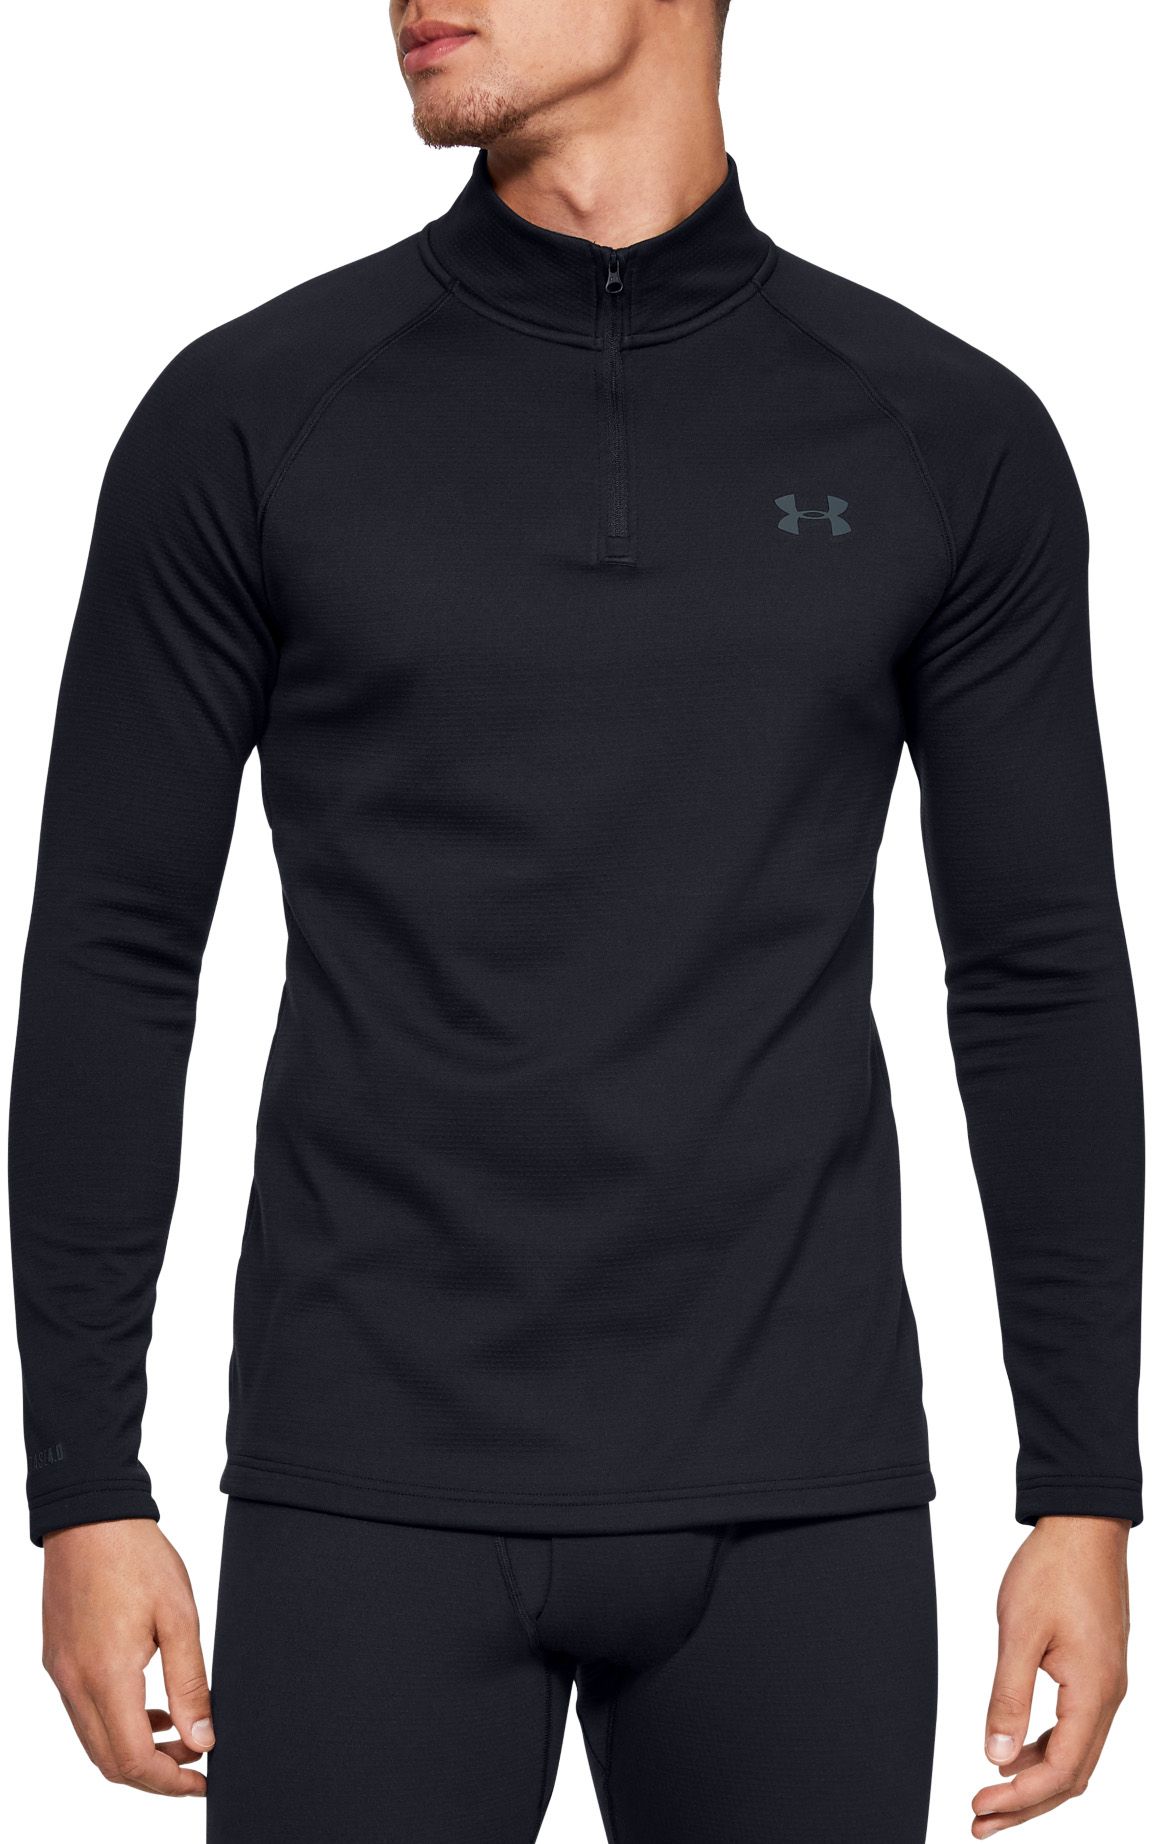 Under Armour Men's Packaged Base 4.0 1 